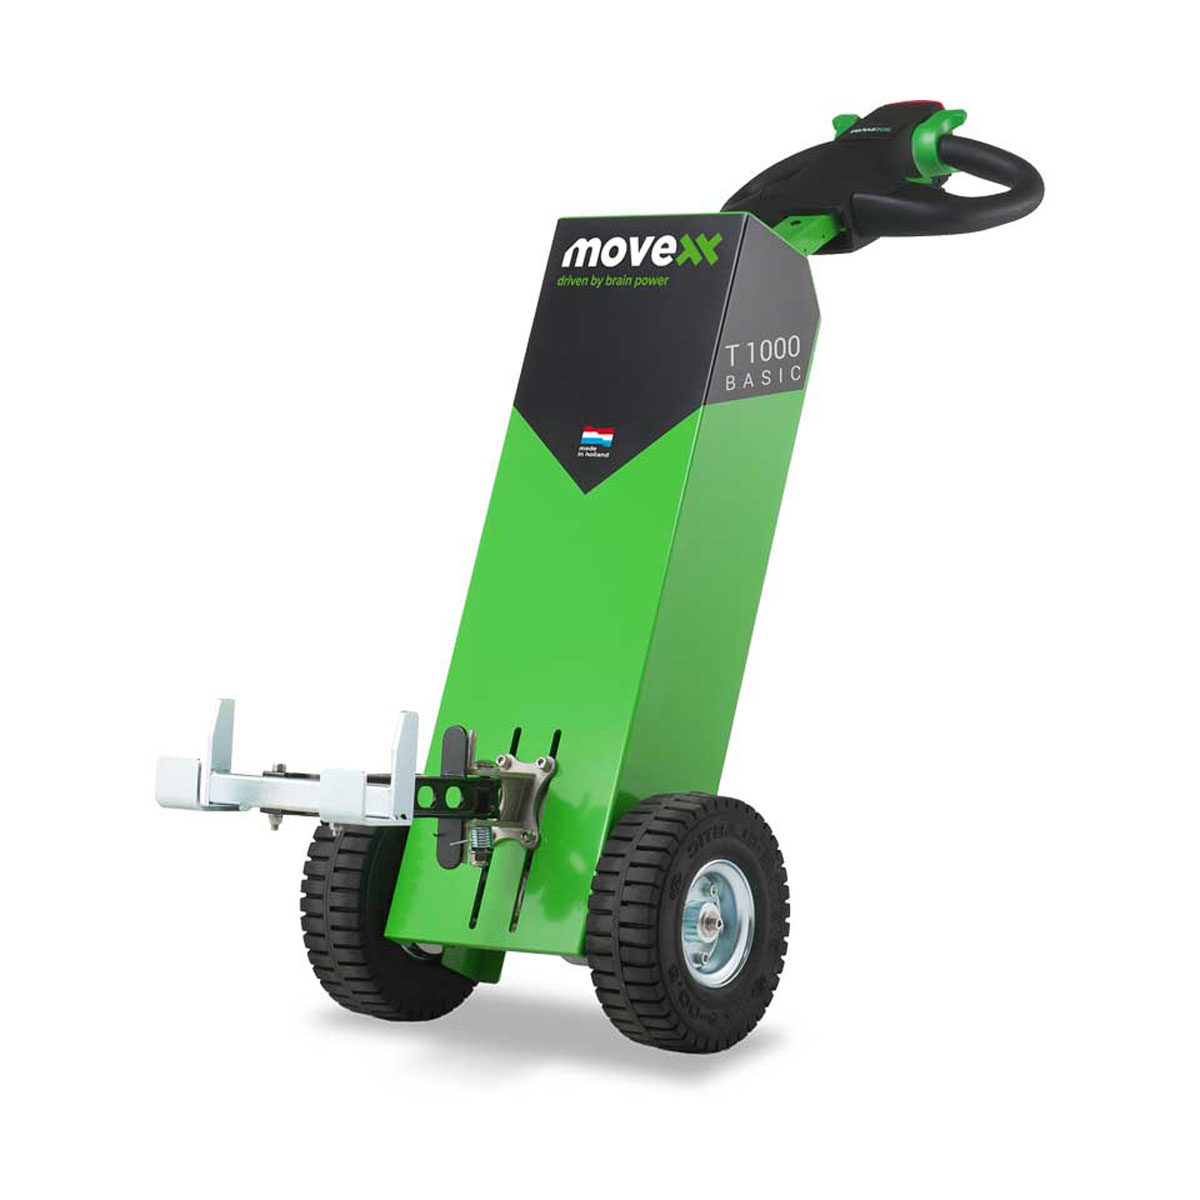 Buy Electric Tug  in Electric Tugs from Movexx available at Astrolift NZ